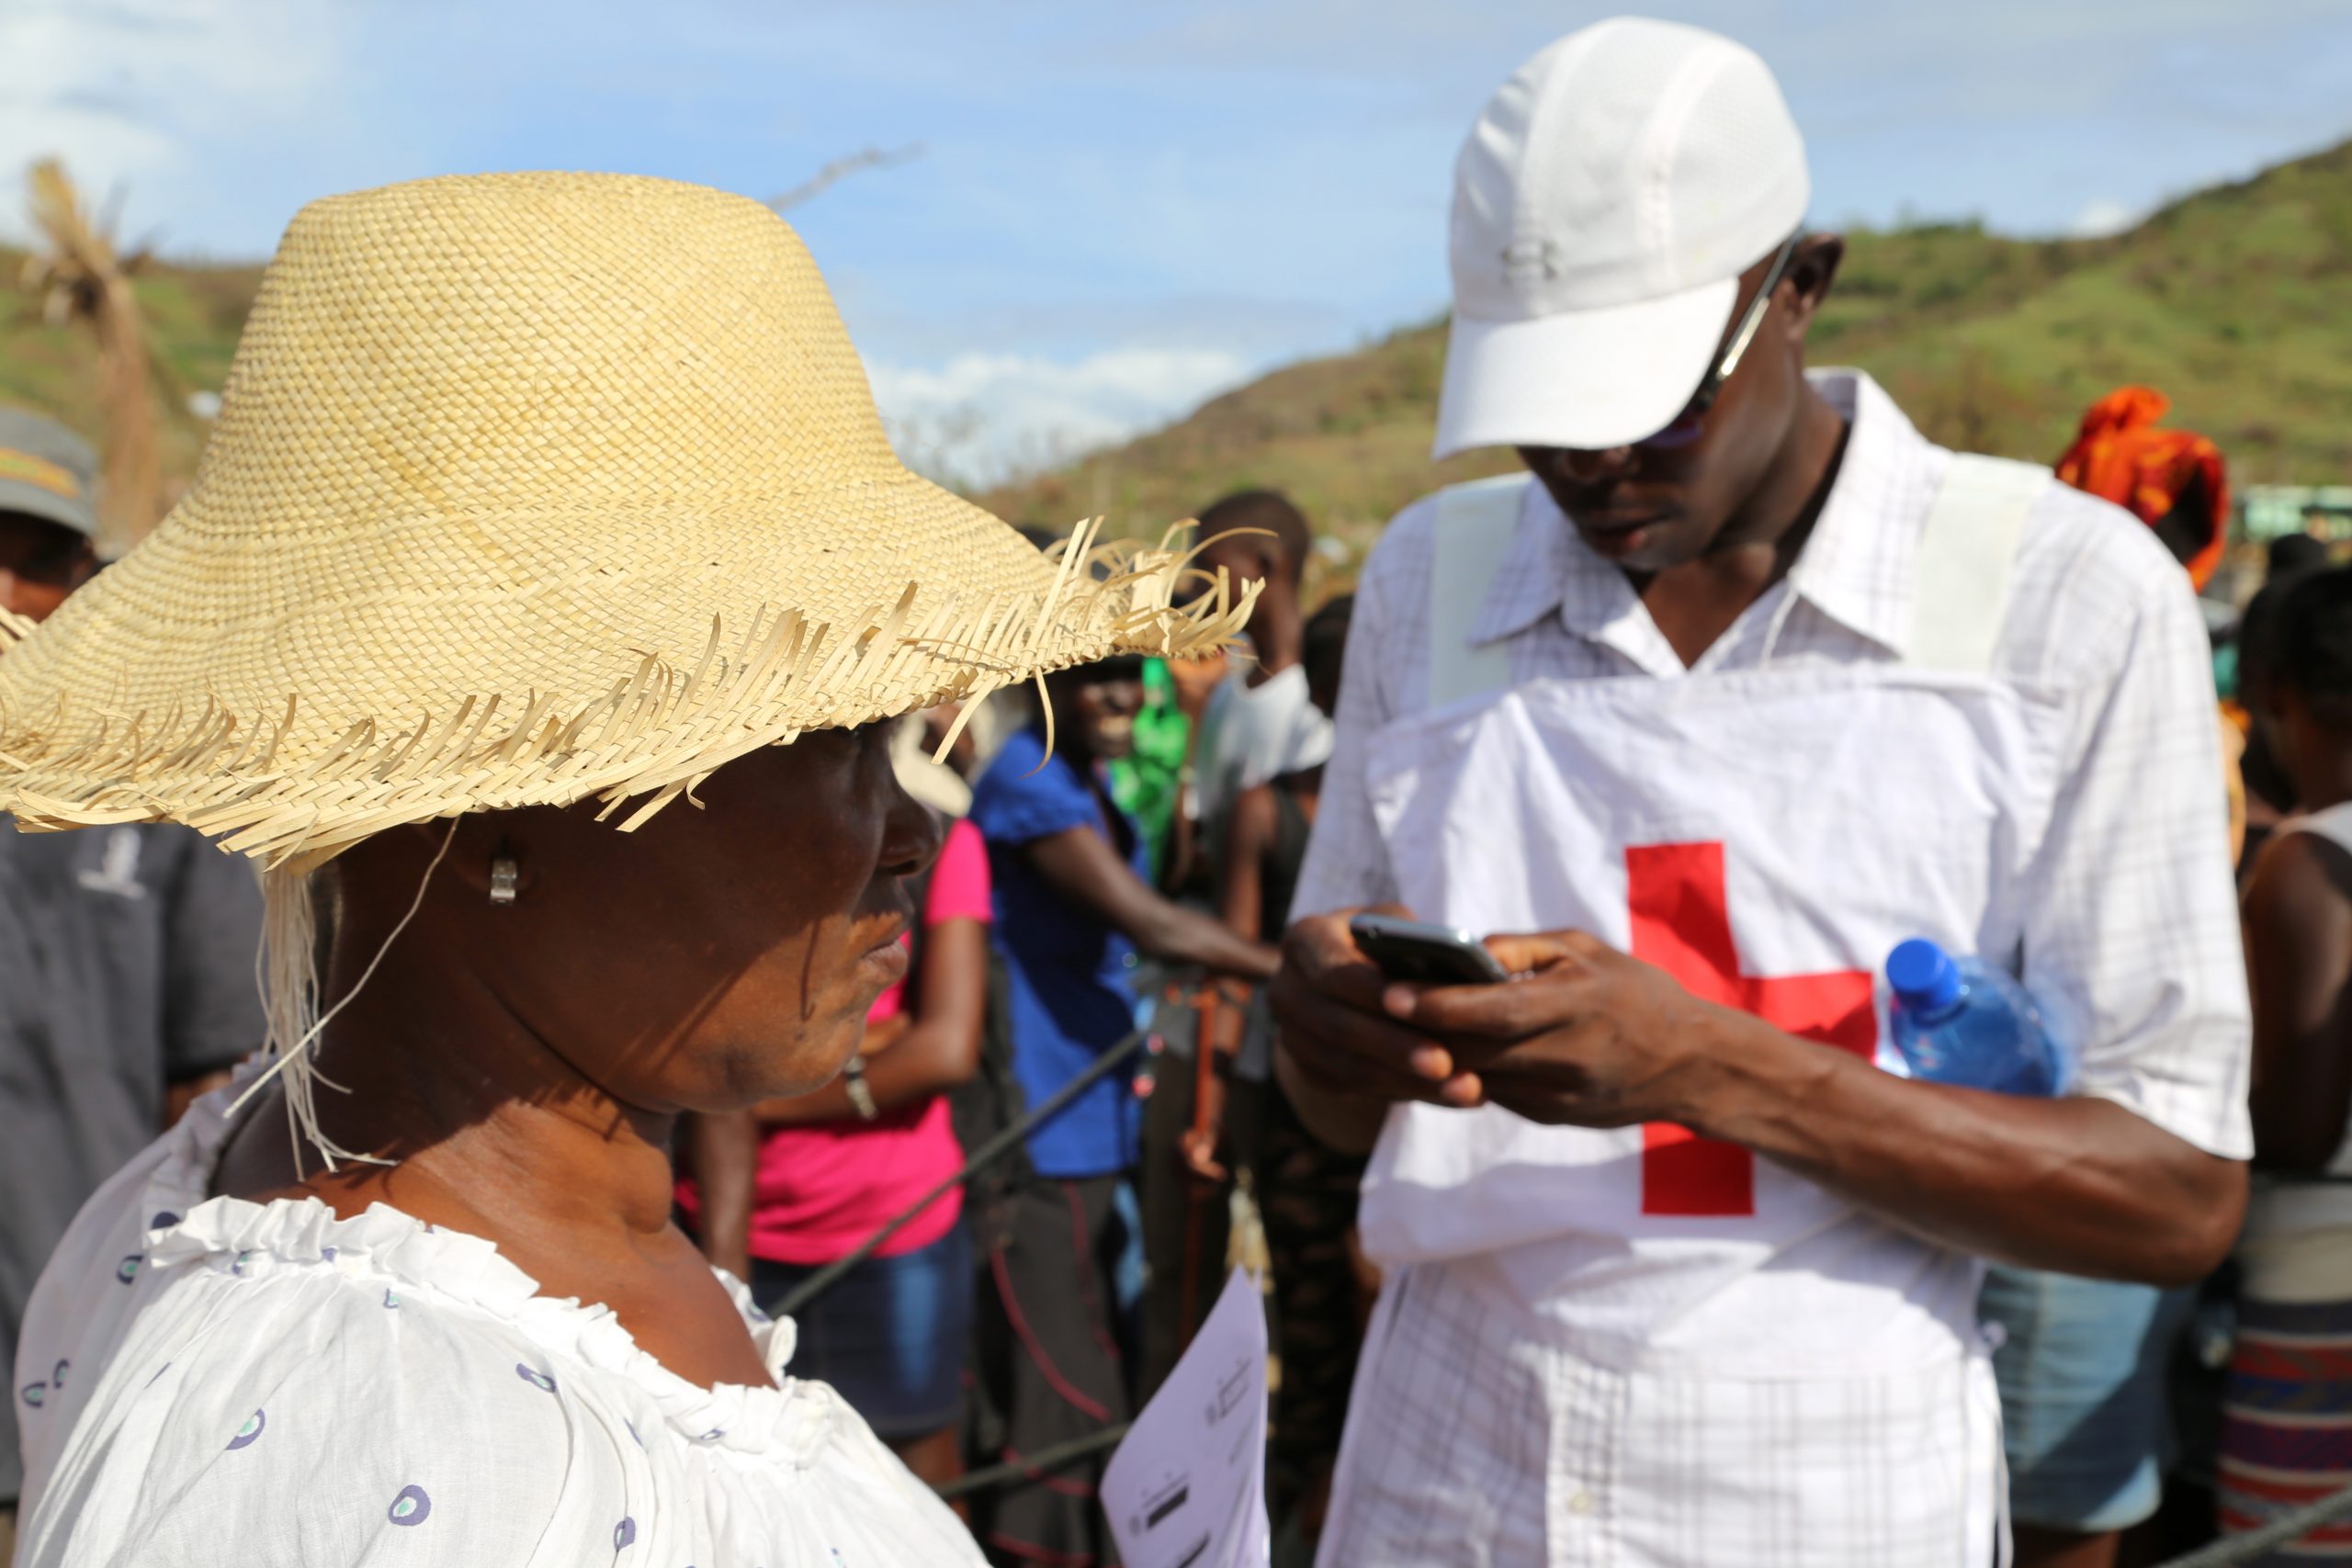 Red Cross volunteers doing an exit survey with a community member in Anse DHainault, Haiti, to ask if shes satisfied with the Red Cross distribution process and what shes received. Listening to communities and tailoring assistance to their needs is an important part of every Red Cross intervention